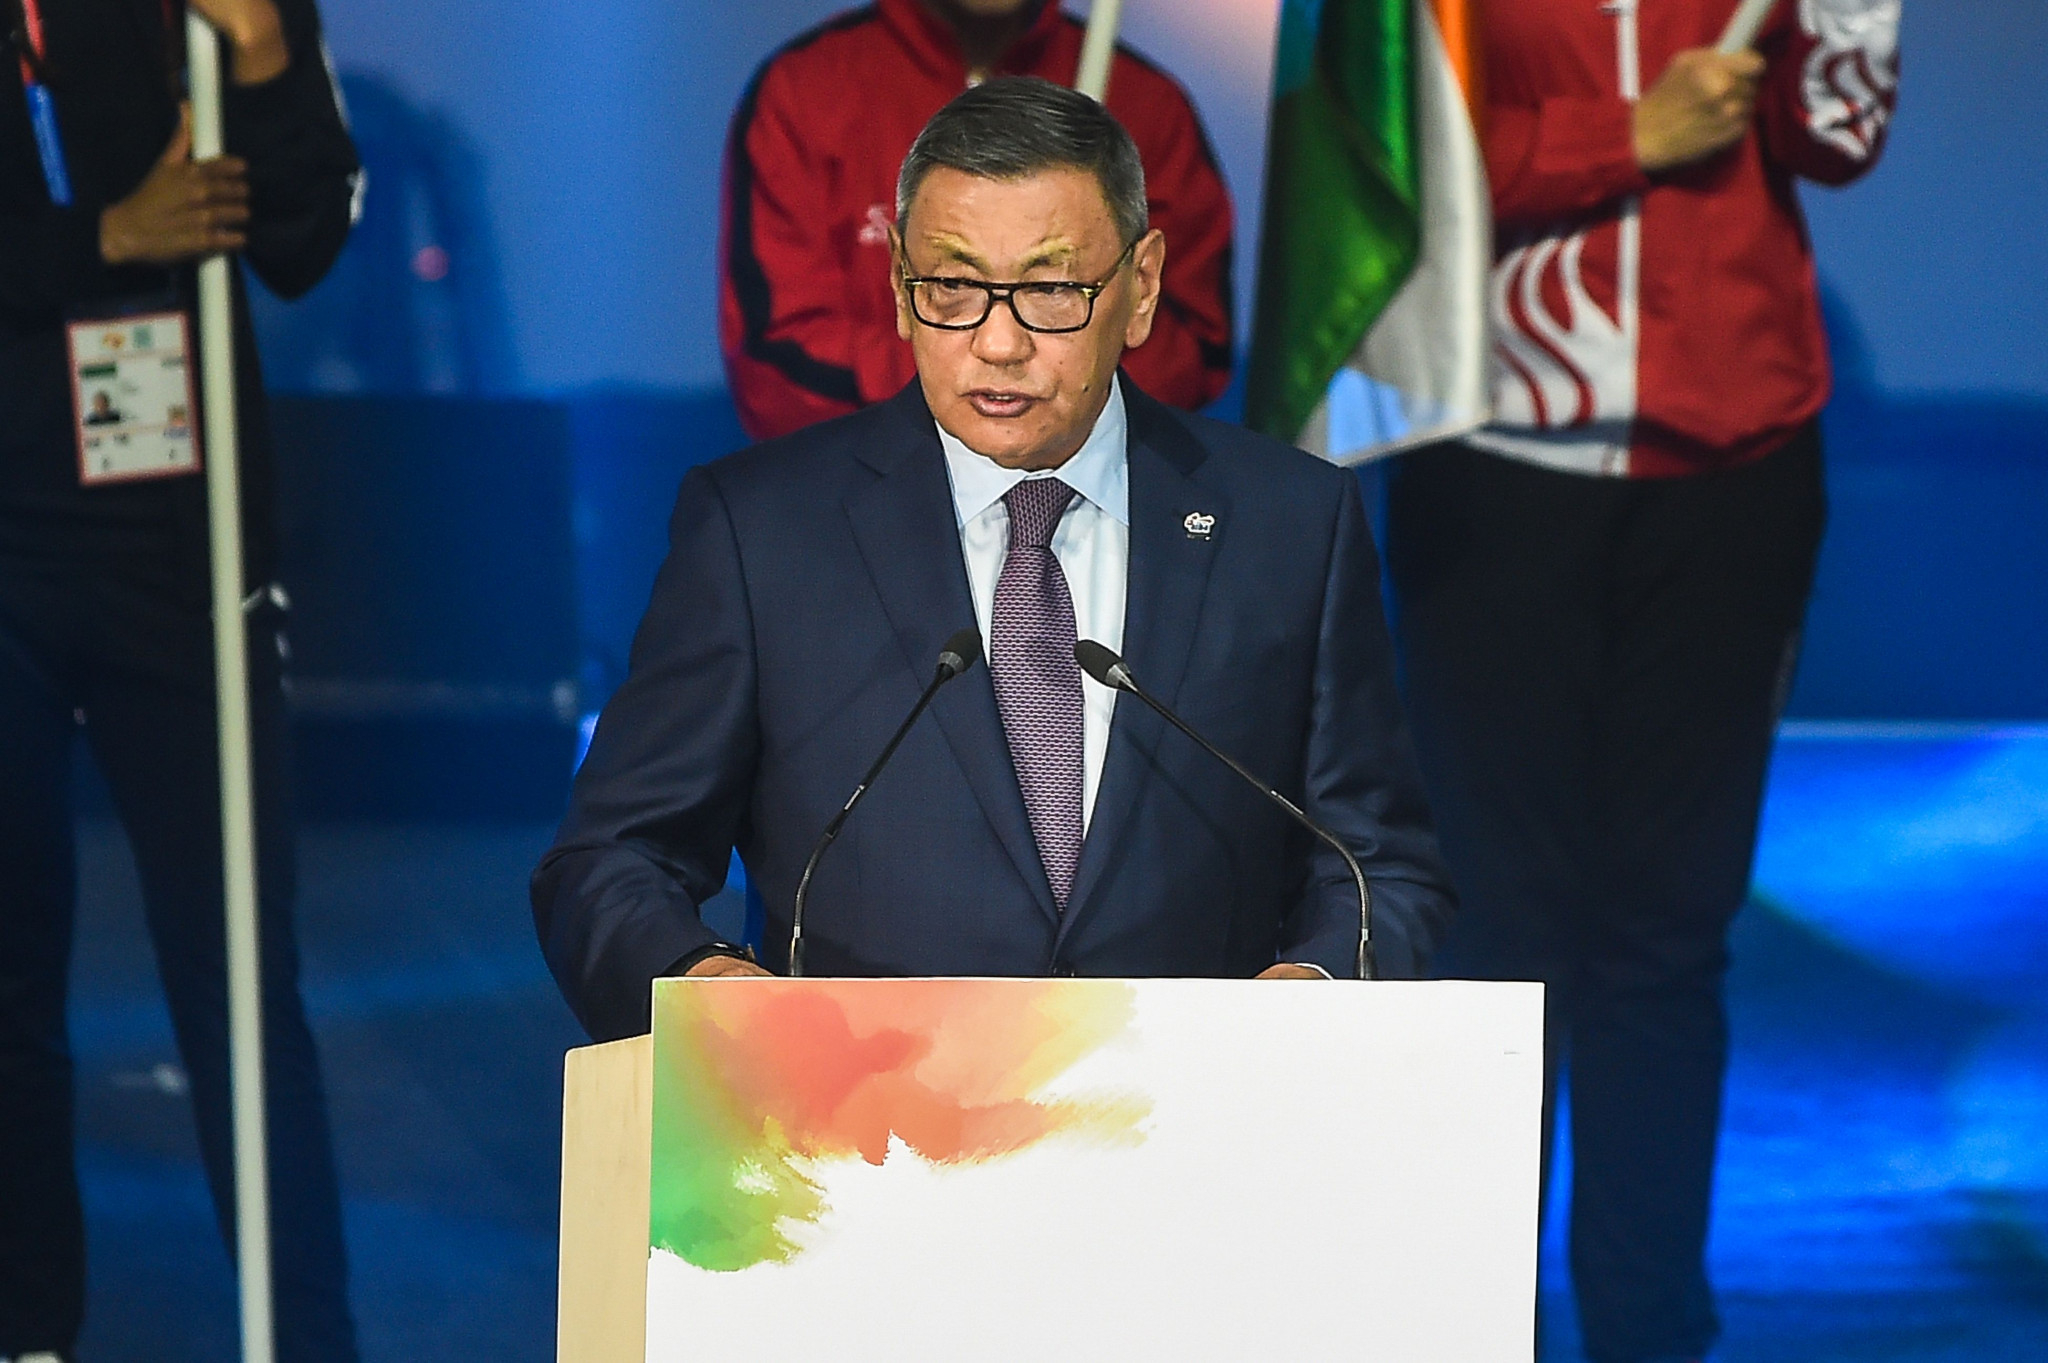 Gafur Rakhimov's election as AIBA President has resulted in widespread controversy ©Getty Images